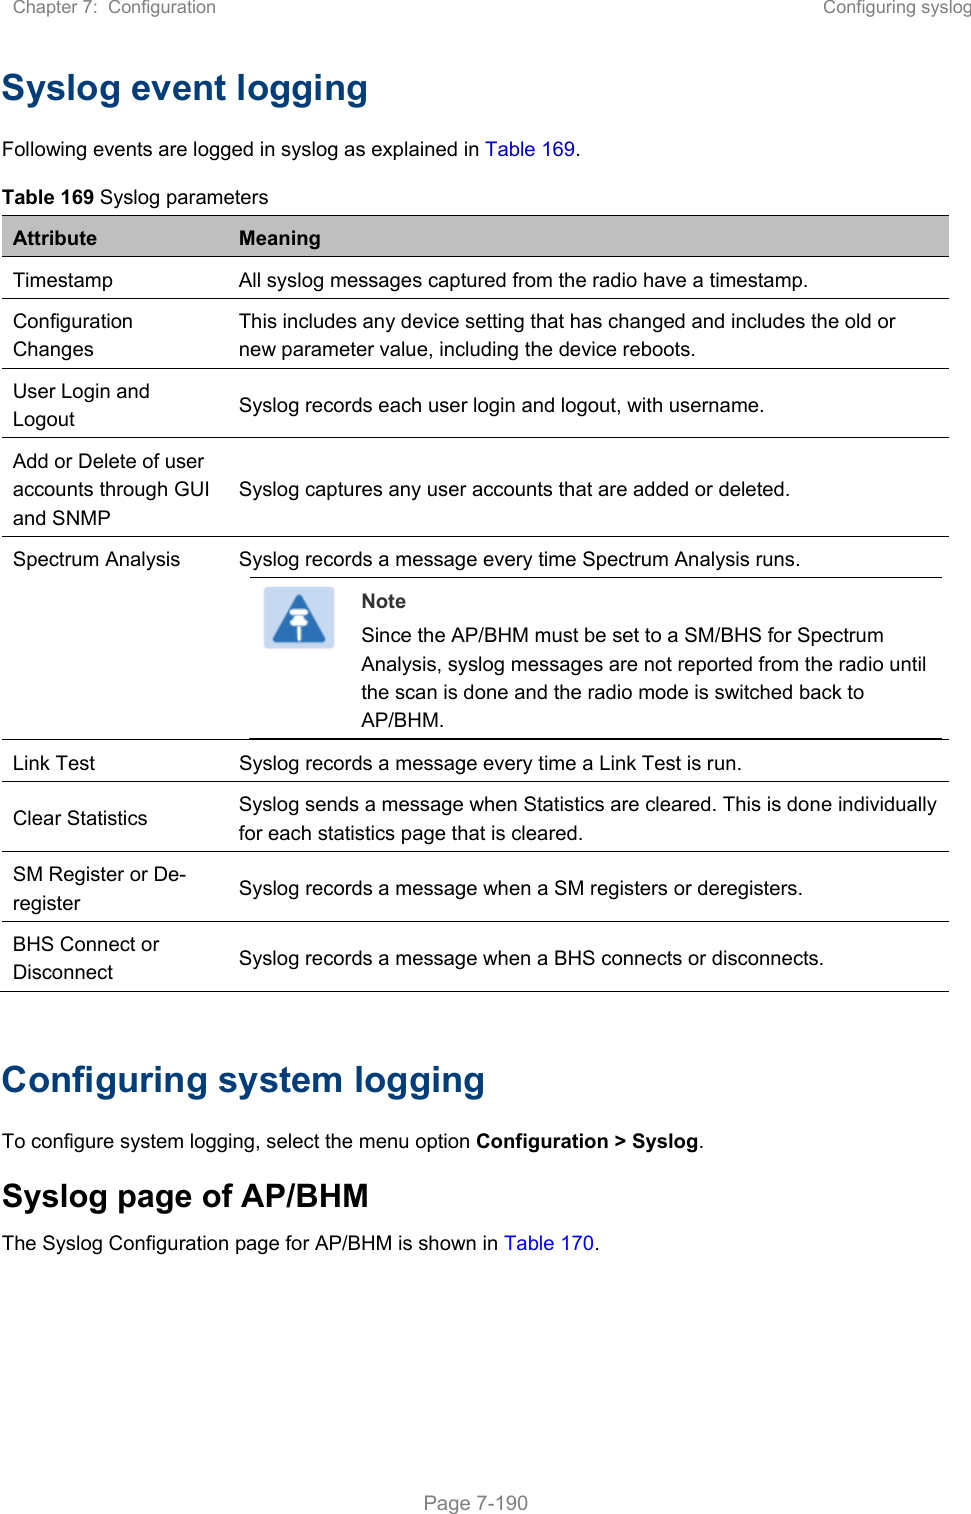 Chapter 7:  Configuration  Configuring syslog   Page 7-190 Syslog event logging Following events are logged in syslog as explained in Table 169. Table 169 Syslog parameters Attribute  Meaning Timestamp   All syslog messages captured from the radio have a timestamp.  Configuration Changes  This includes any device setting that has changed and includes the old or new parameter value, including the device reboots.  User Login and Logout   Syslog records each user login and logout, with username.  Add or Delete of user accounts through GUI and SNMP  Syslog captures any user accounts that are added or deleted.  Spectrum Analysis  Syslog records a message every time Spectrum Analysis runs.  Note Since the AP/BHM must be set to a SM/BHS for Spectrum Analysis, syslog messages are not reported from the radio until the scan is done and the radio mode is switched back to AP/BHM. Link Test   Syslog records a message every time a Link Test is run.  Clear Statistics   Syslog sends a message when Statistics are cleared. This is done individually for each statistics page that is cleared.  SM Register or De-register   Syslog records a message when a SM registers or deregisters.  BHS Connect or Disconnect  Syslog records a message when a BHS connects or disconnects.  Configuring system logging To configure system logging, select the menu option Configuration &gt; Syslog. Syslog page of AP/BHM The Syslog Configuration page for AP/BHM is shown in Table 170. 